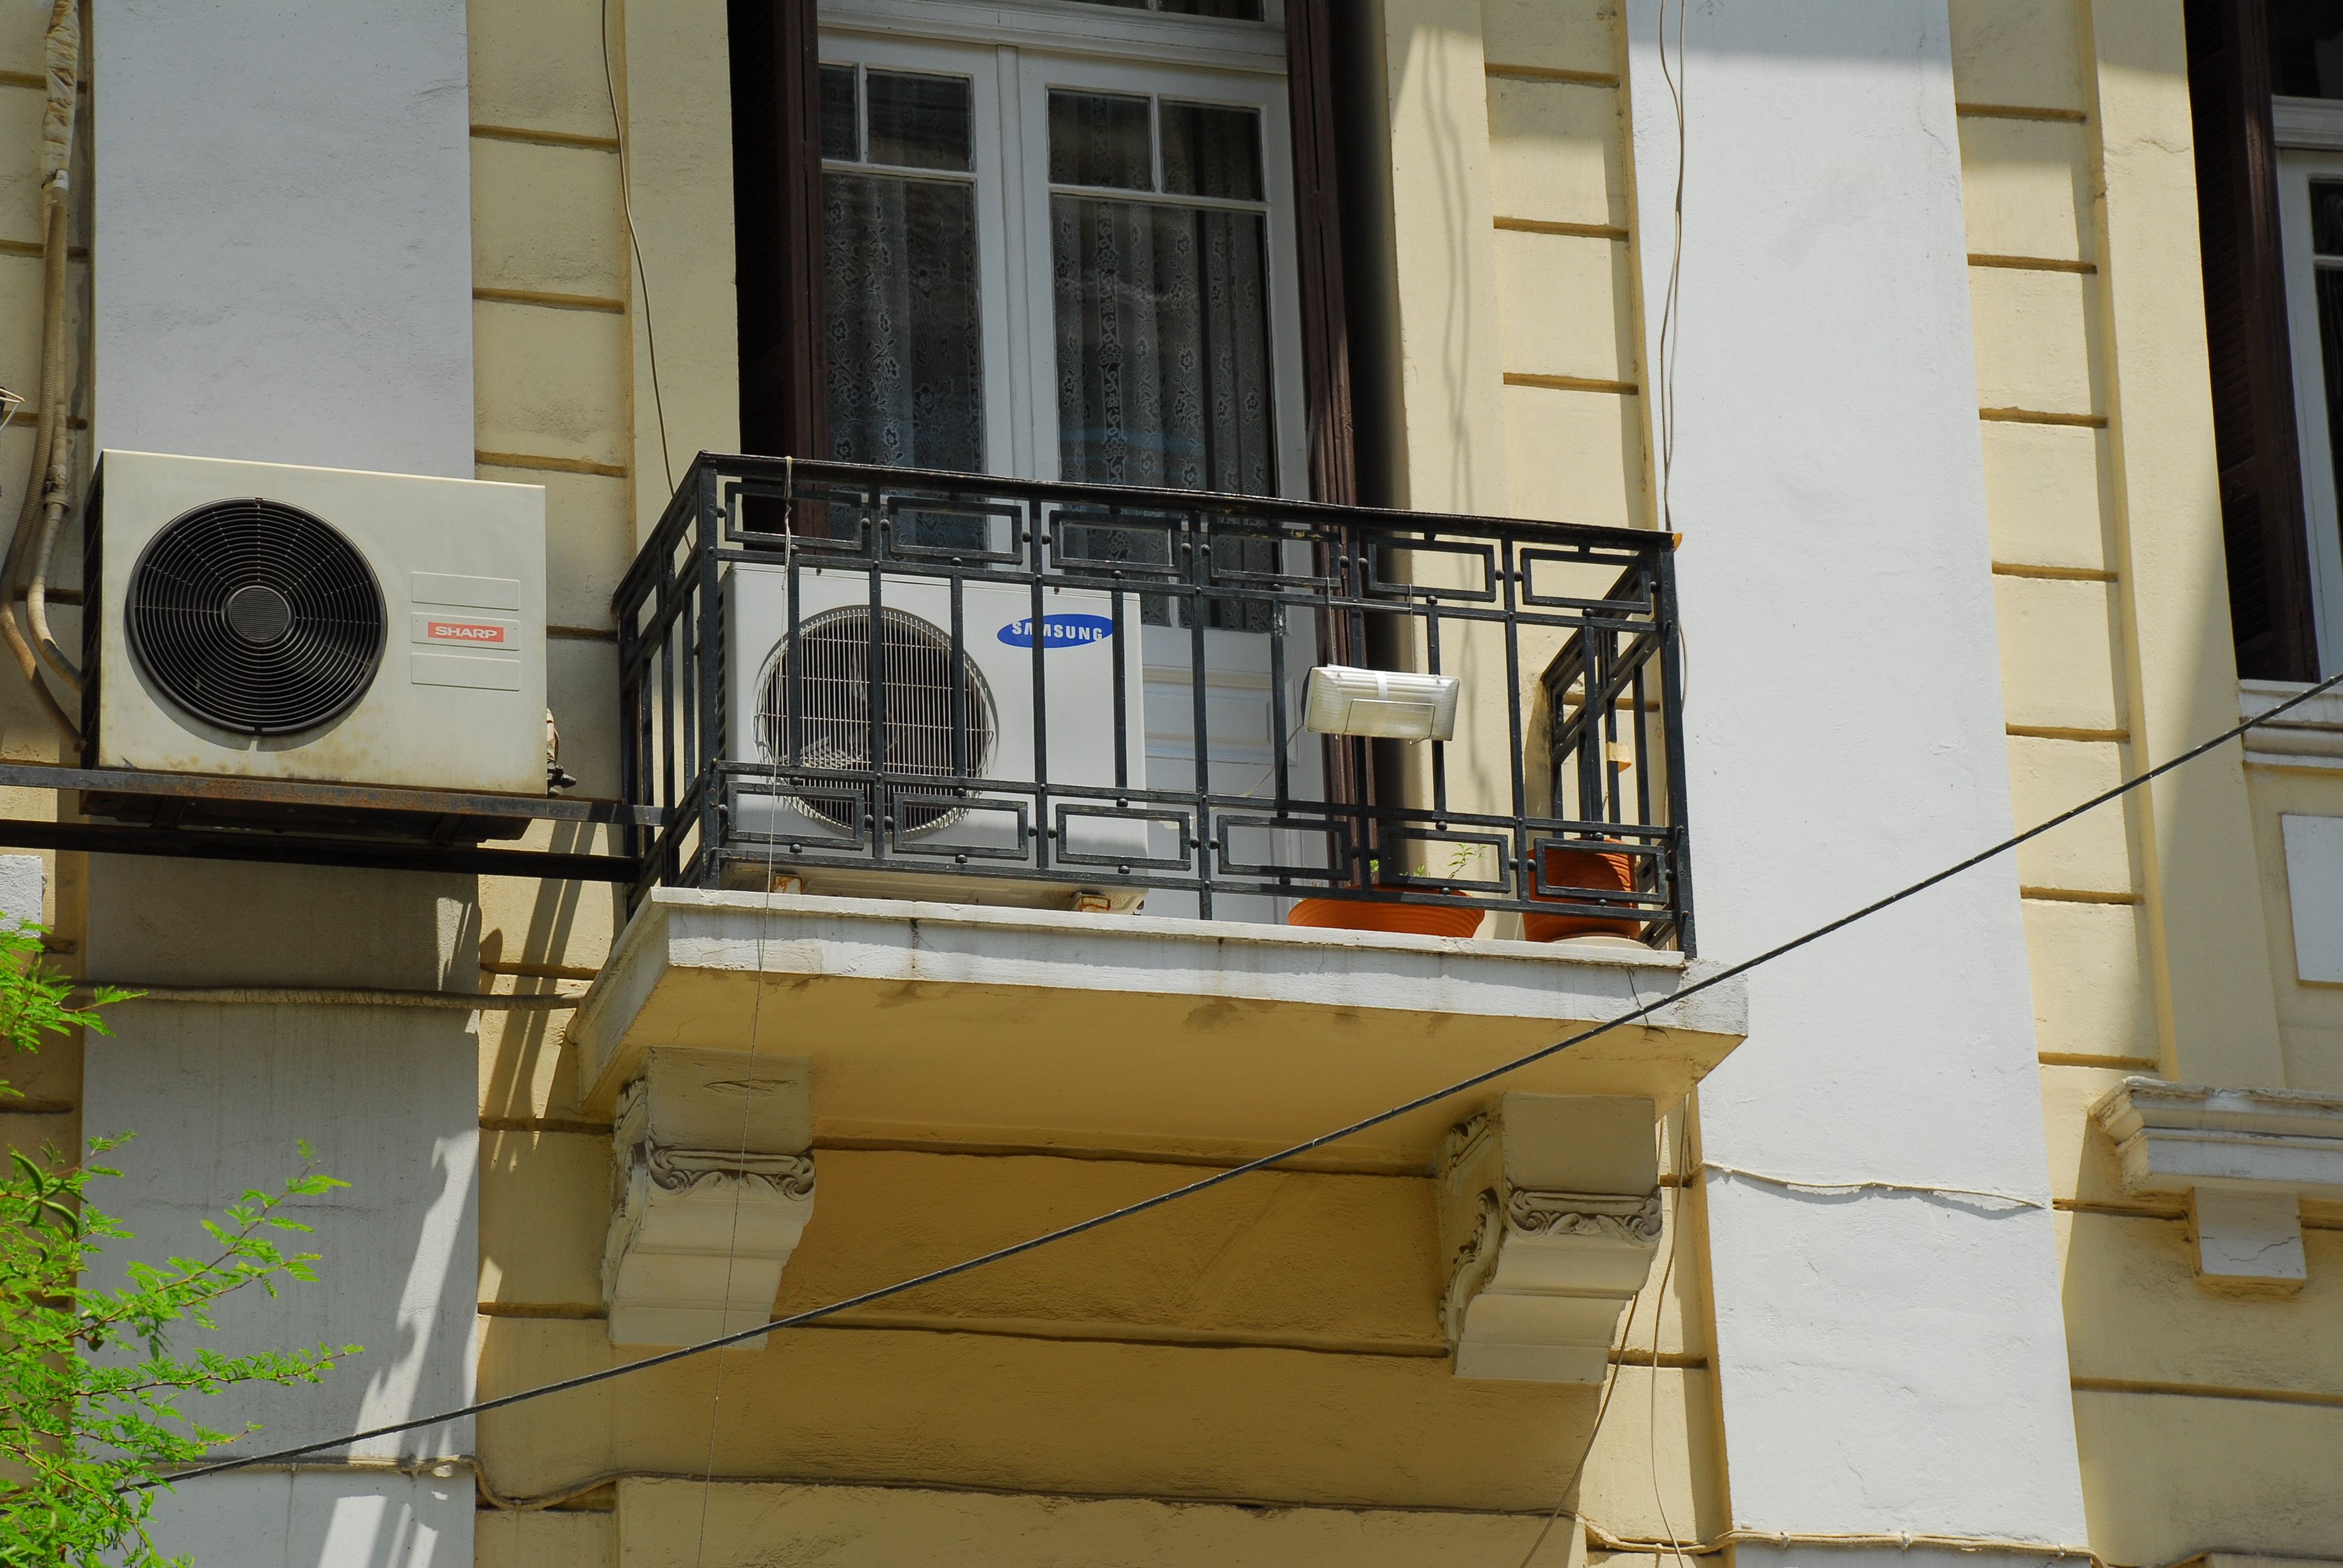 General view of balcony (2013)